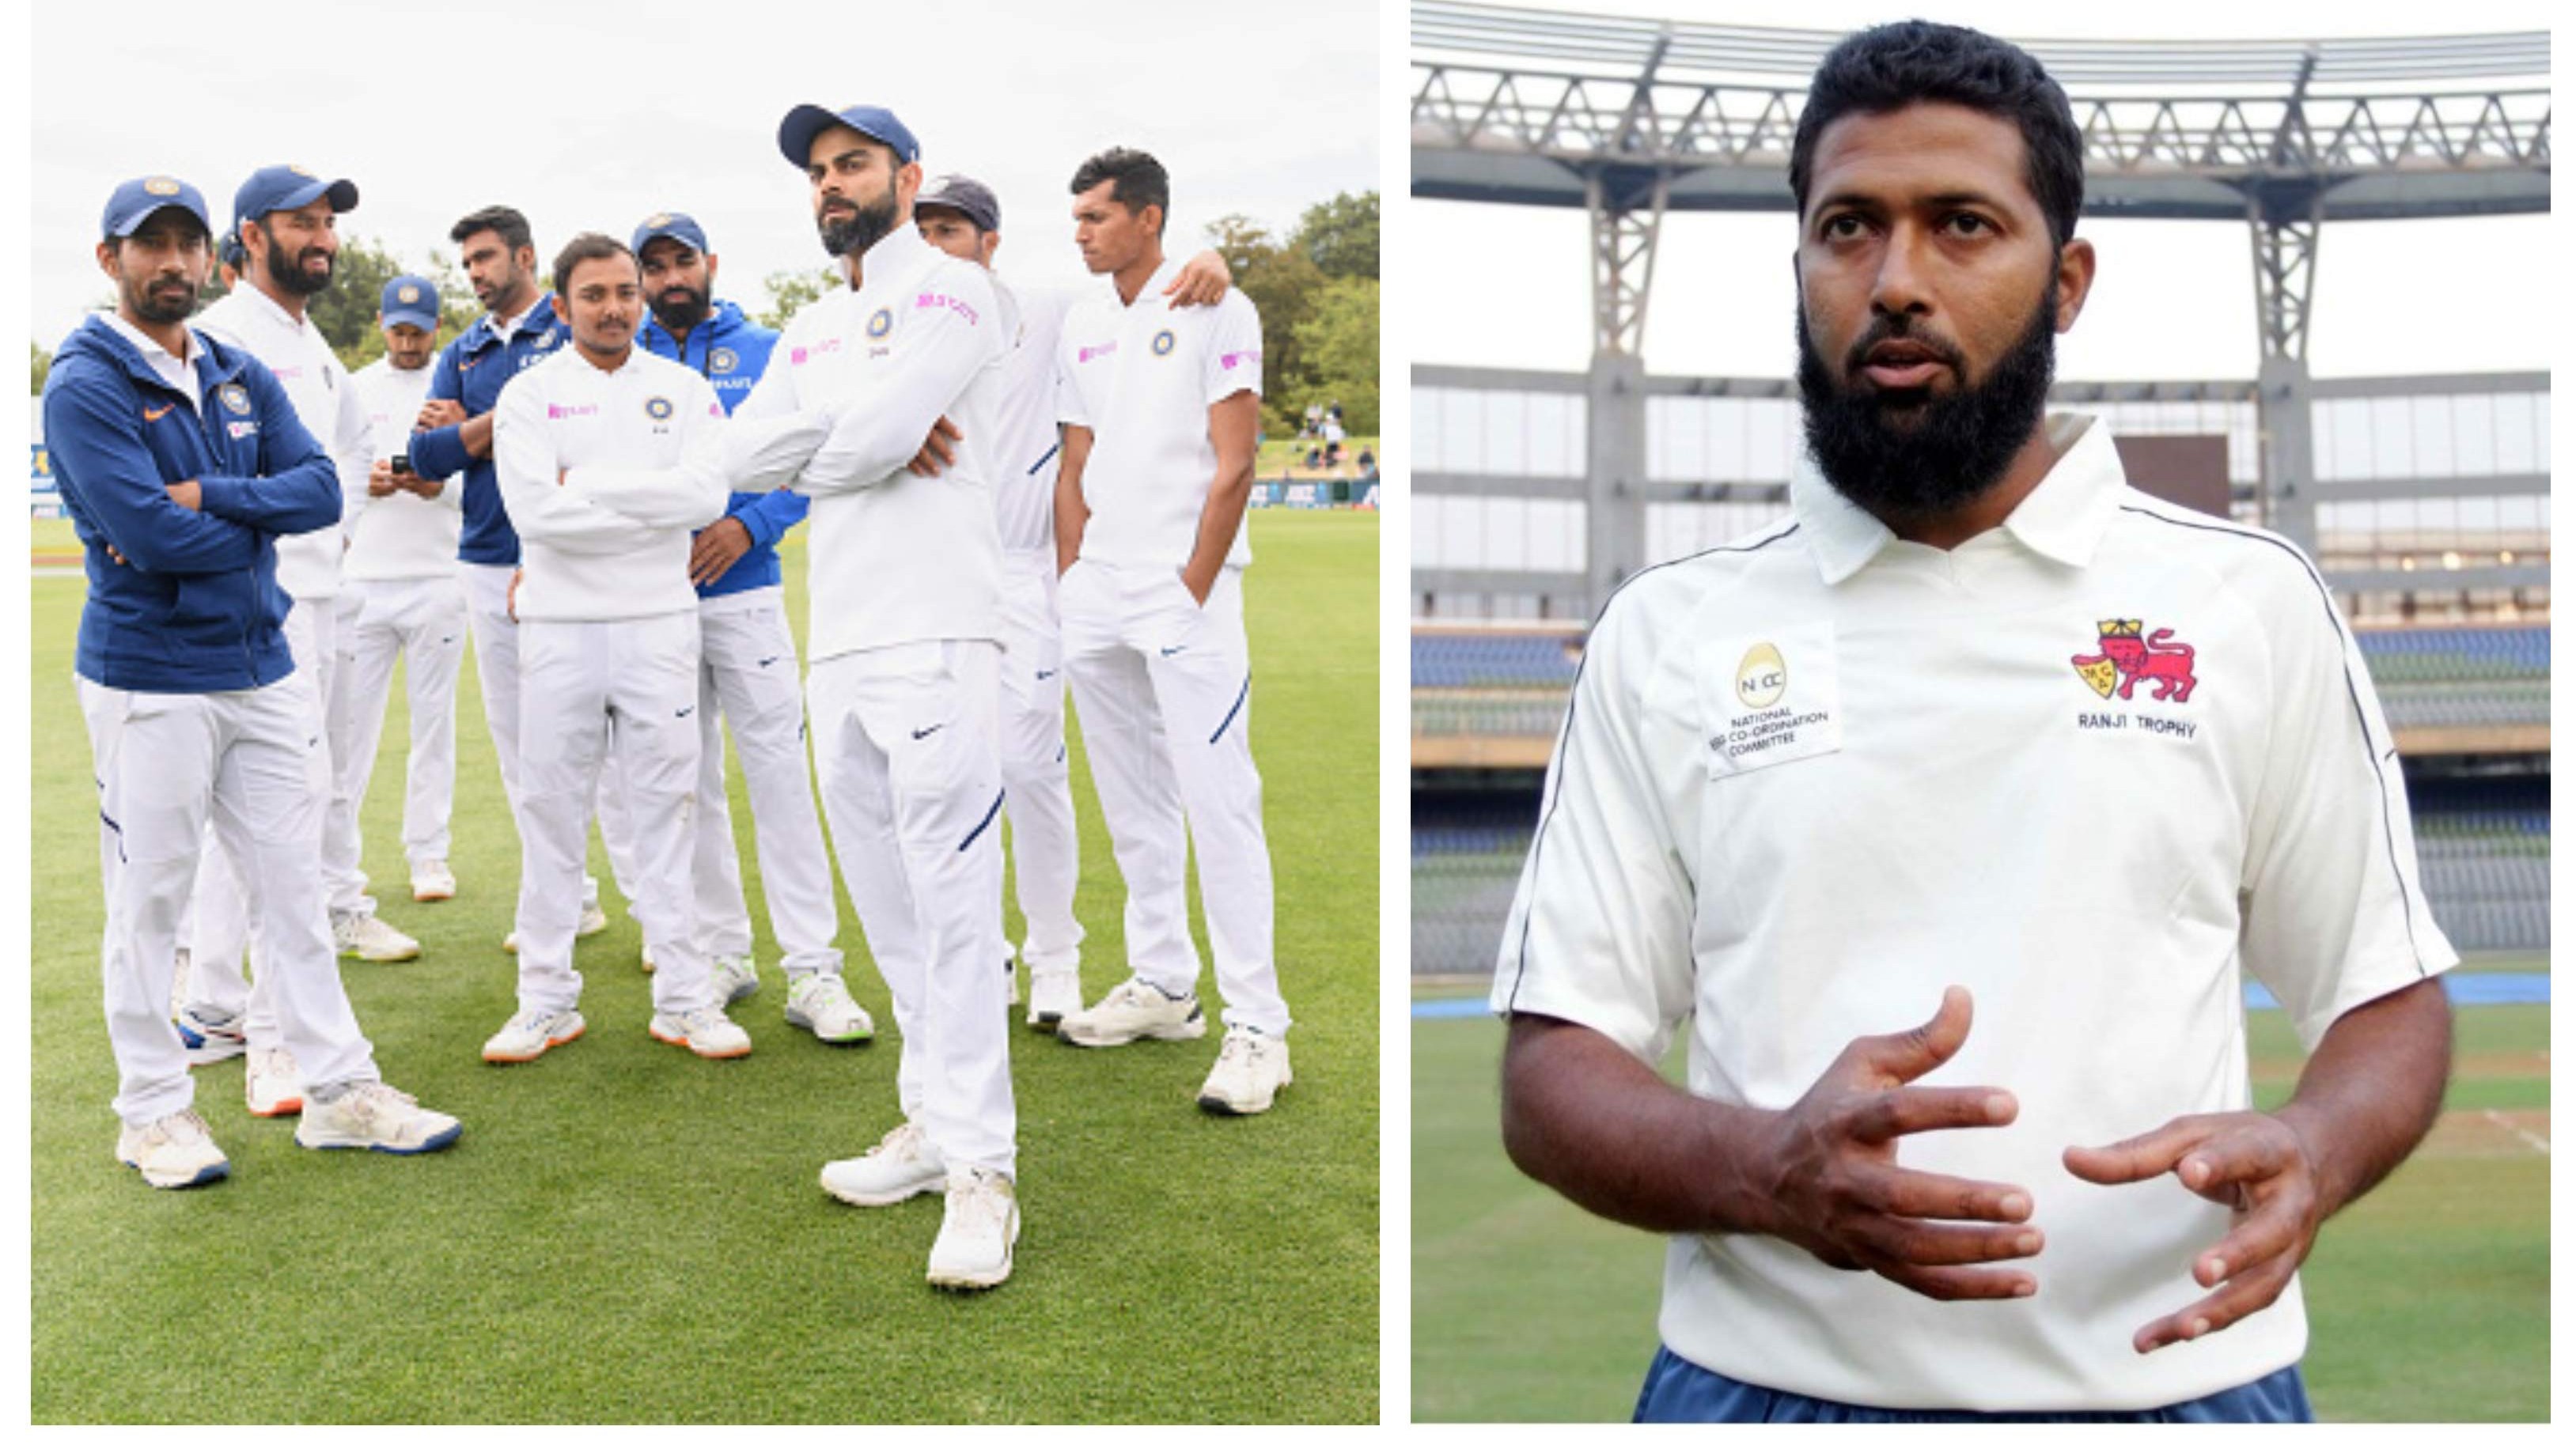 Wasim Jaffer not impressed with India's overseas showing in Test cricket